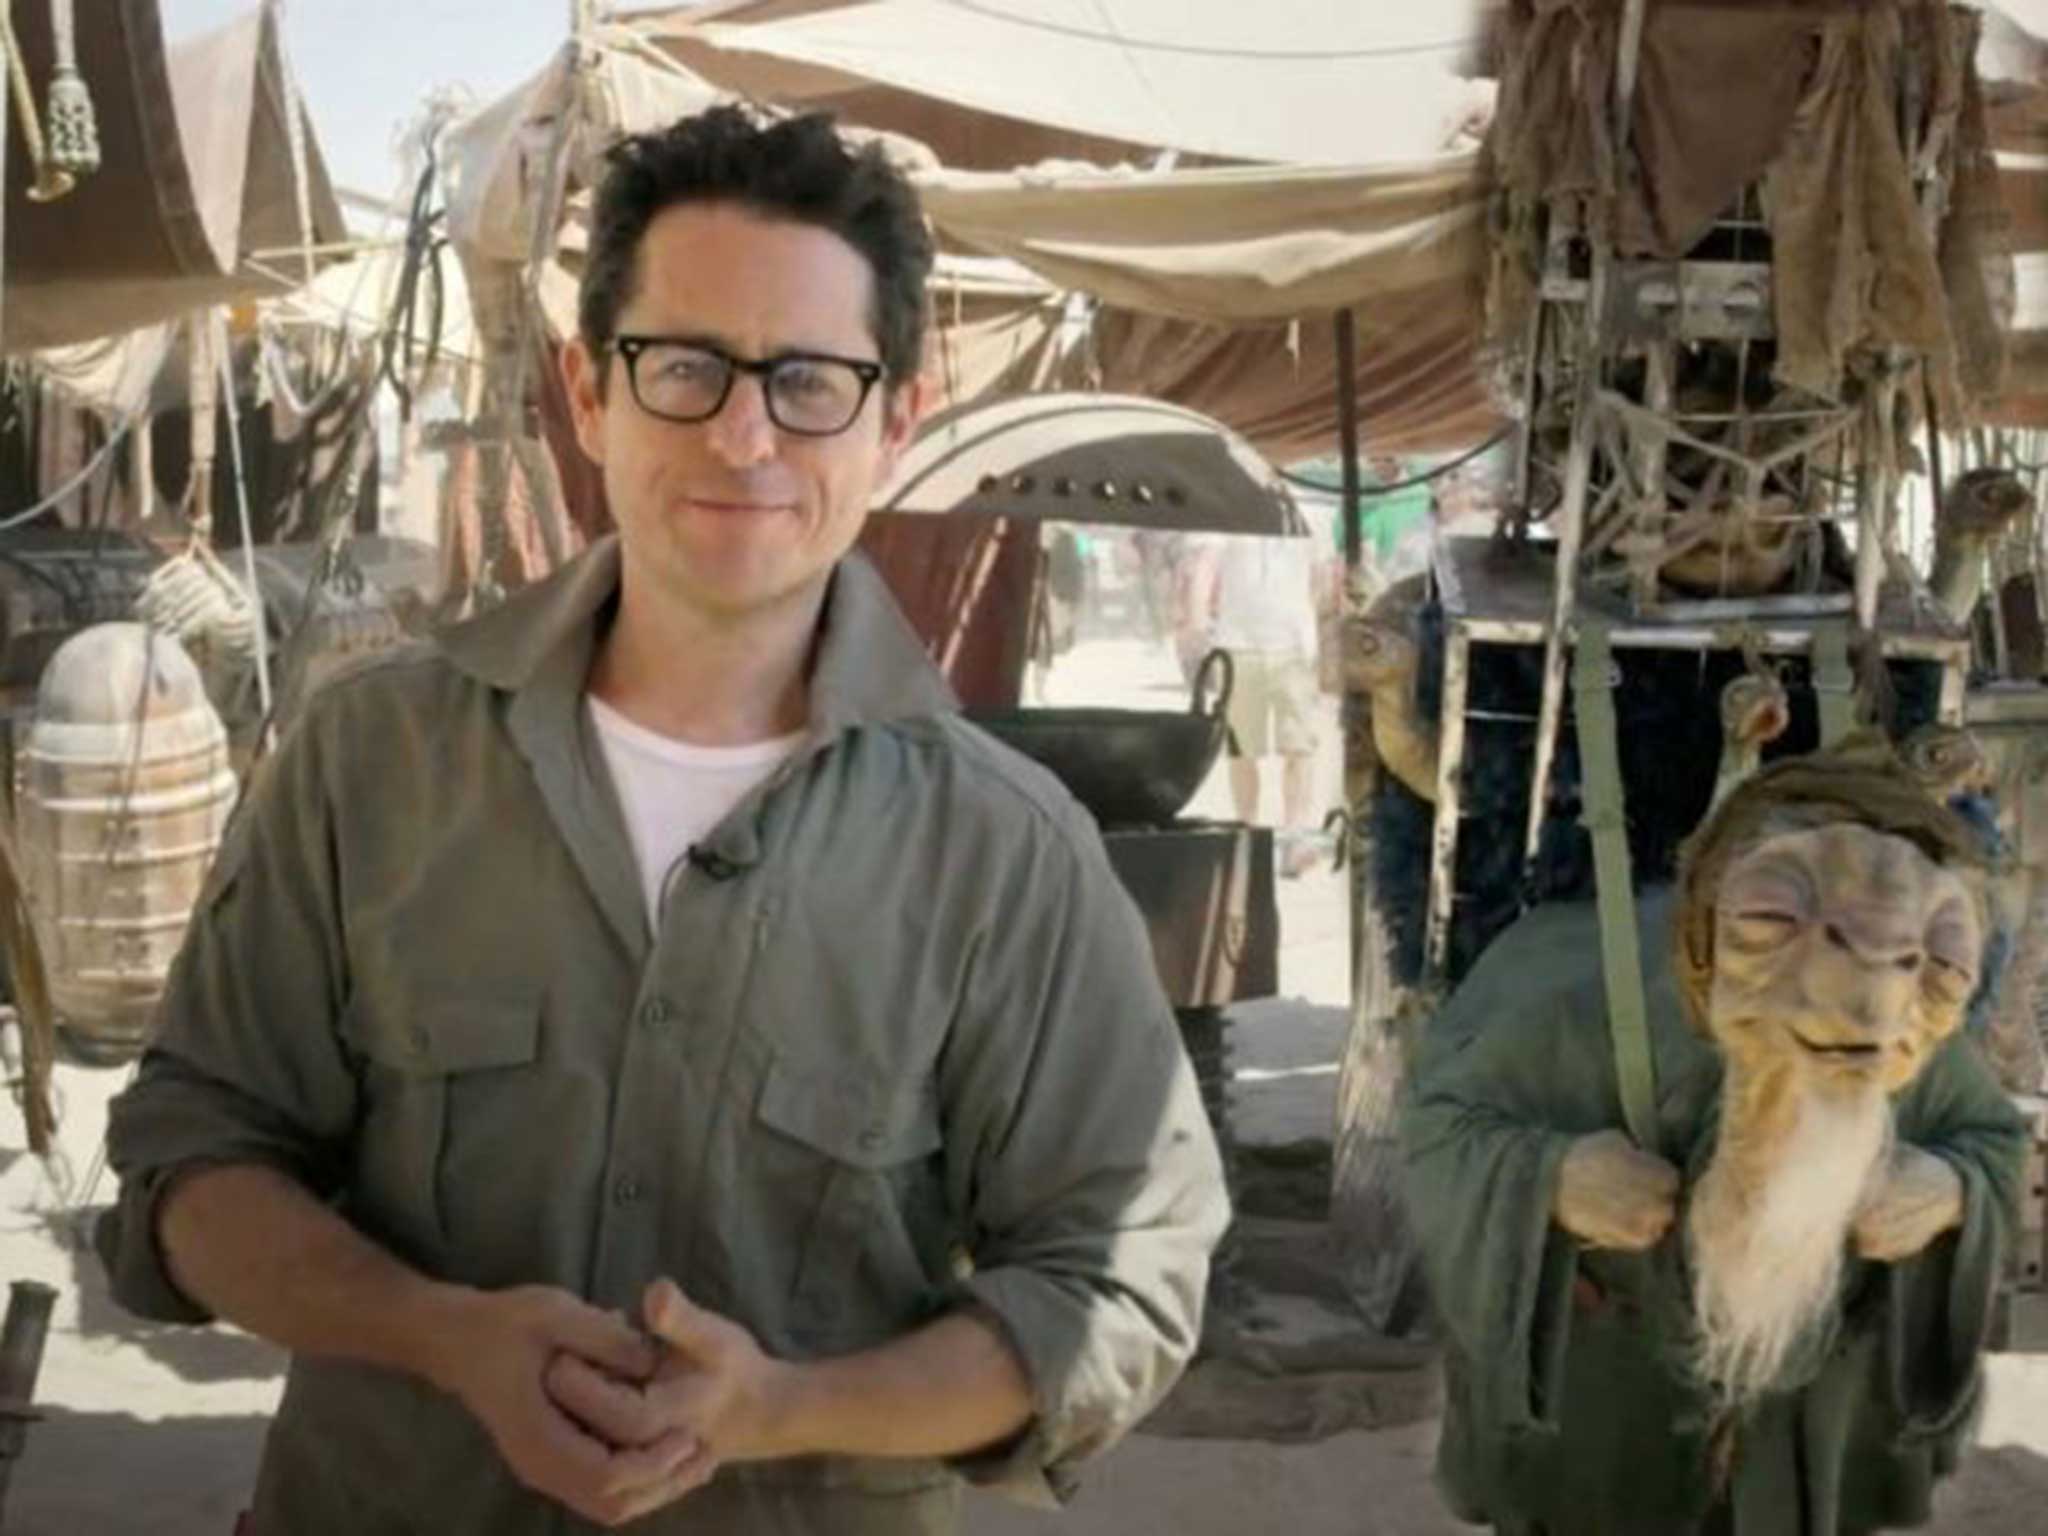 Star Wars Director JJ Abrams: key character's names have been revealed